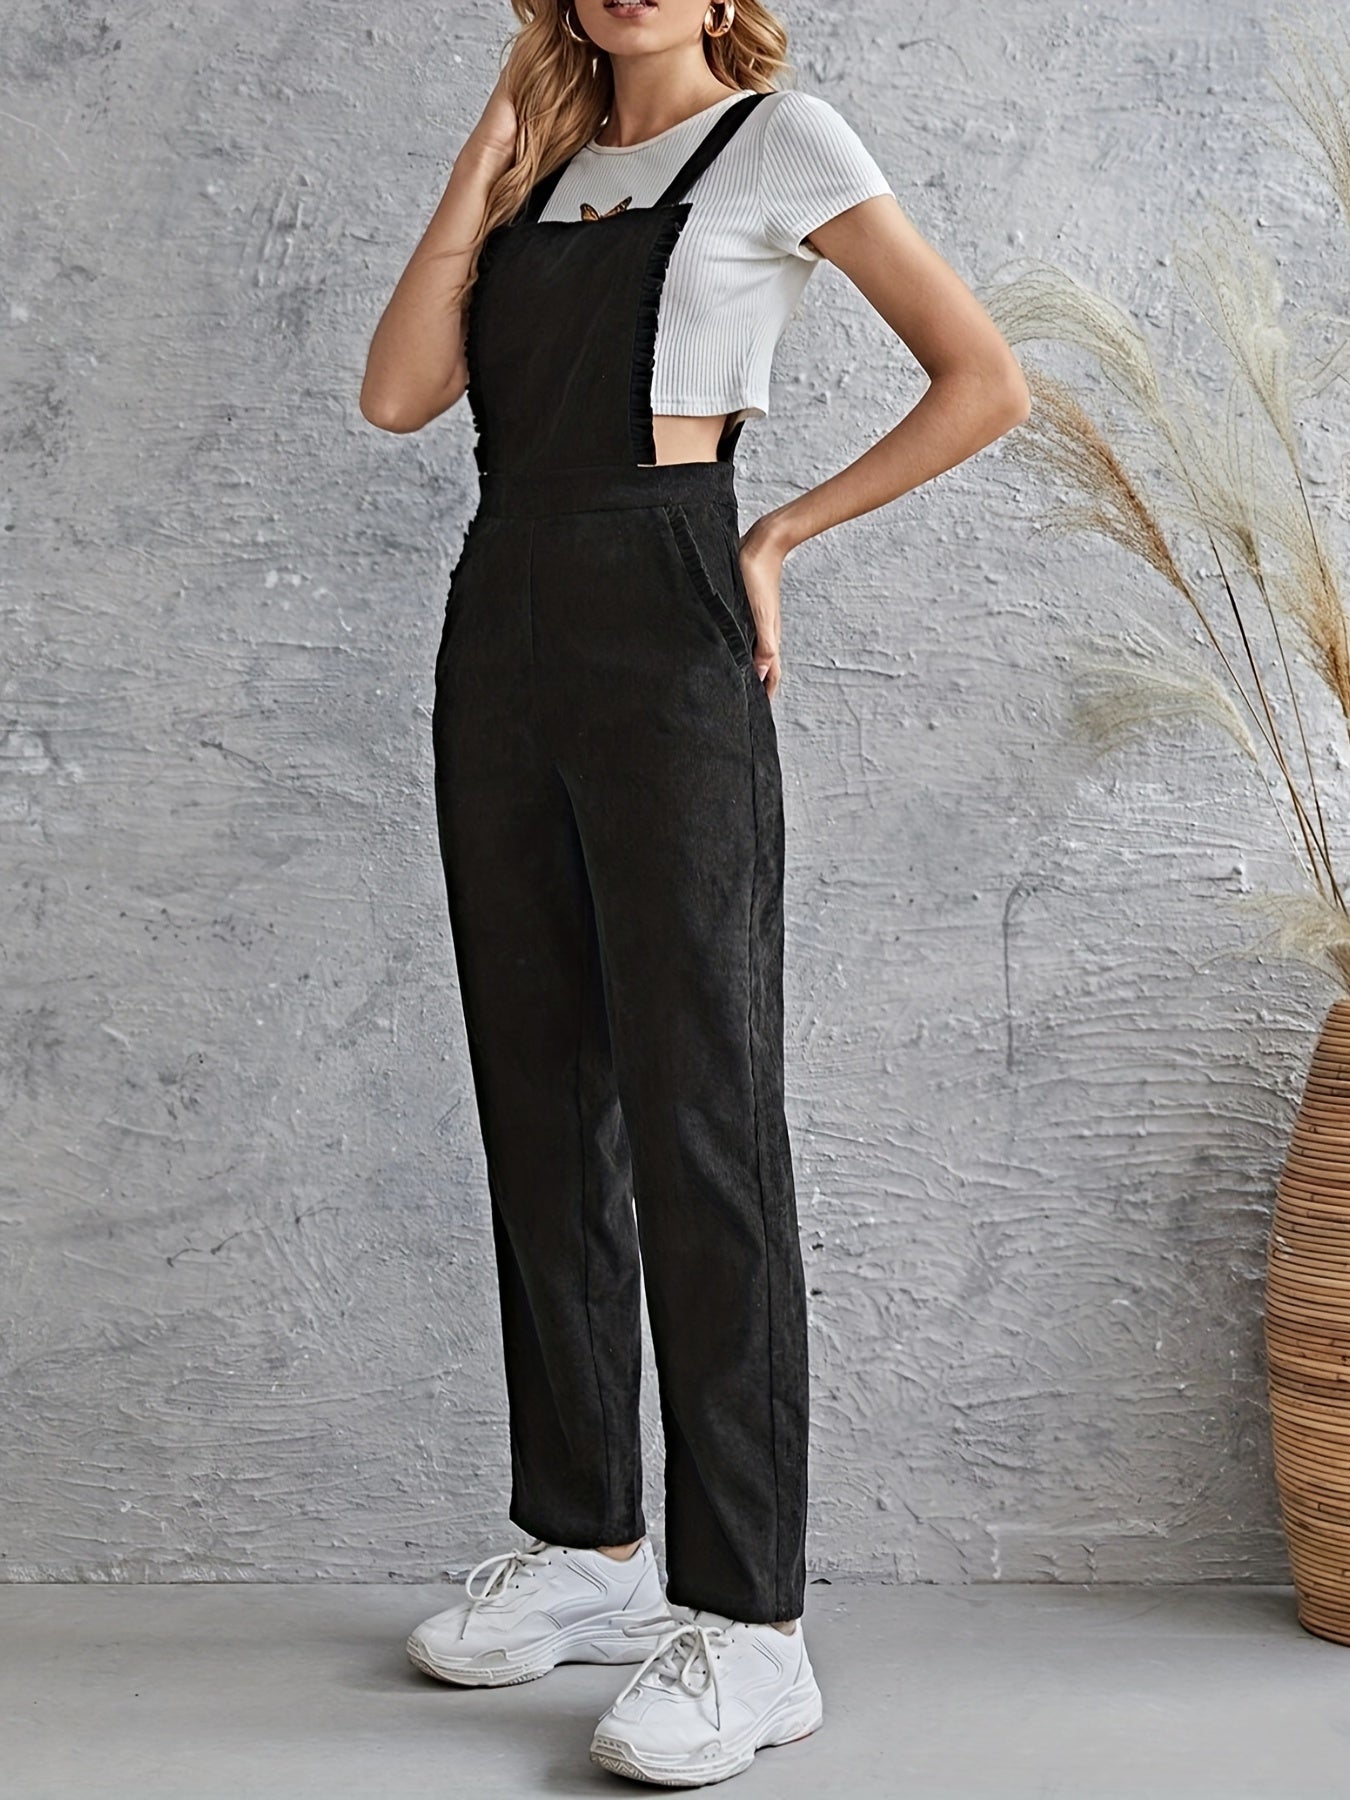 Antmvs Solid Ruffle Trim Overall Jumpsuit, Versatile Slant Pockets Corduroy Jumpsuit For Spring & Fall, Women's Clothing